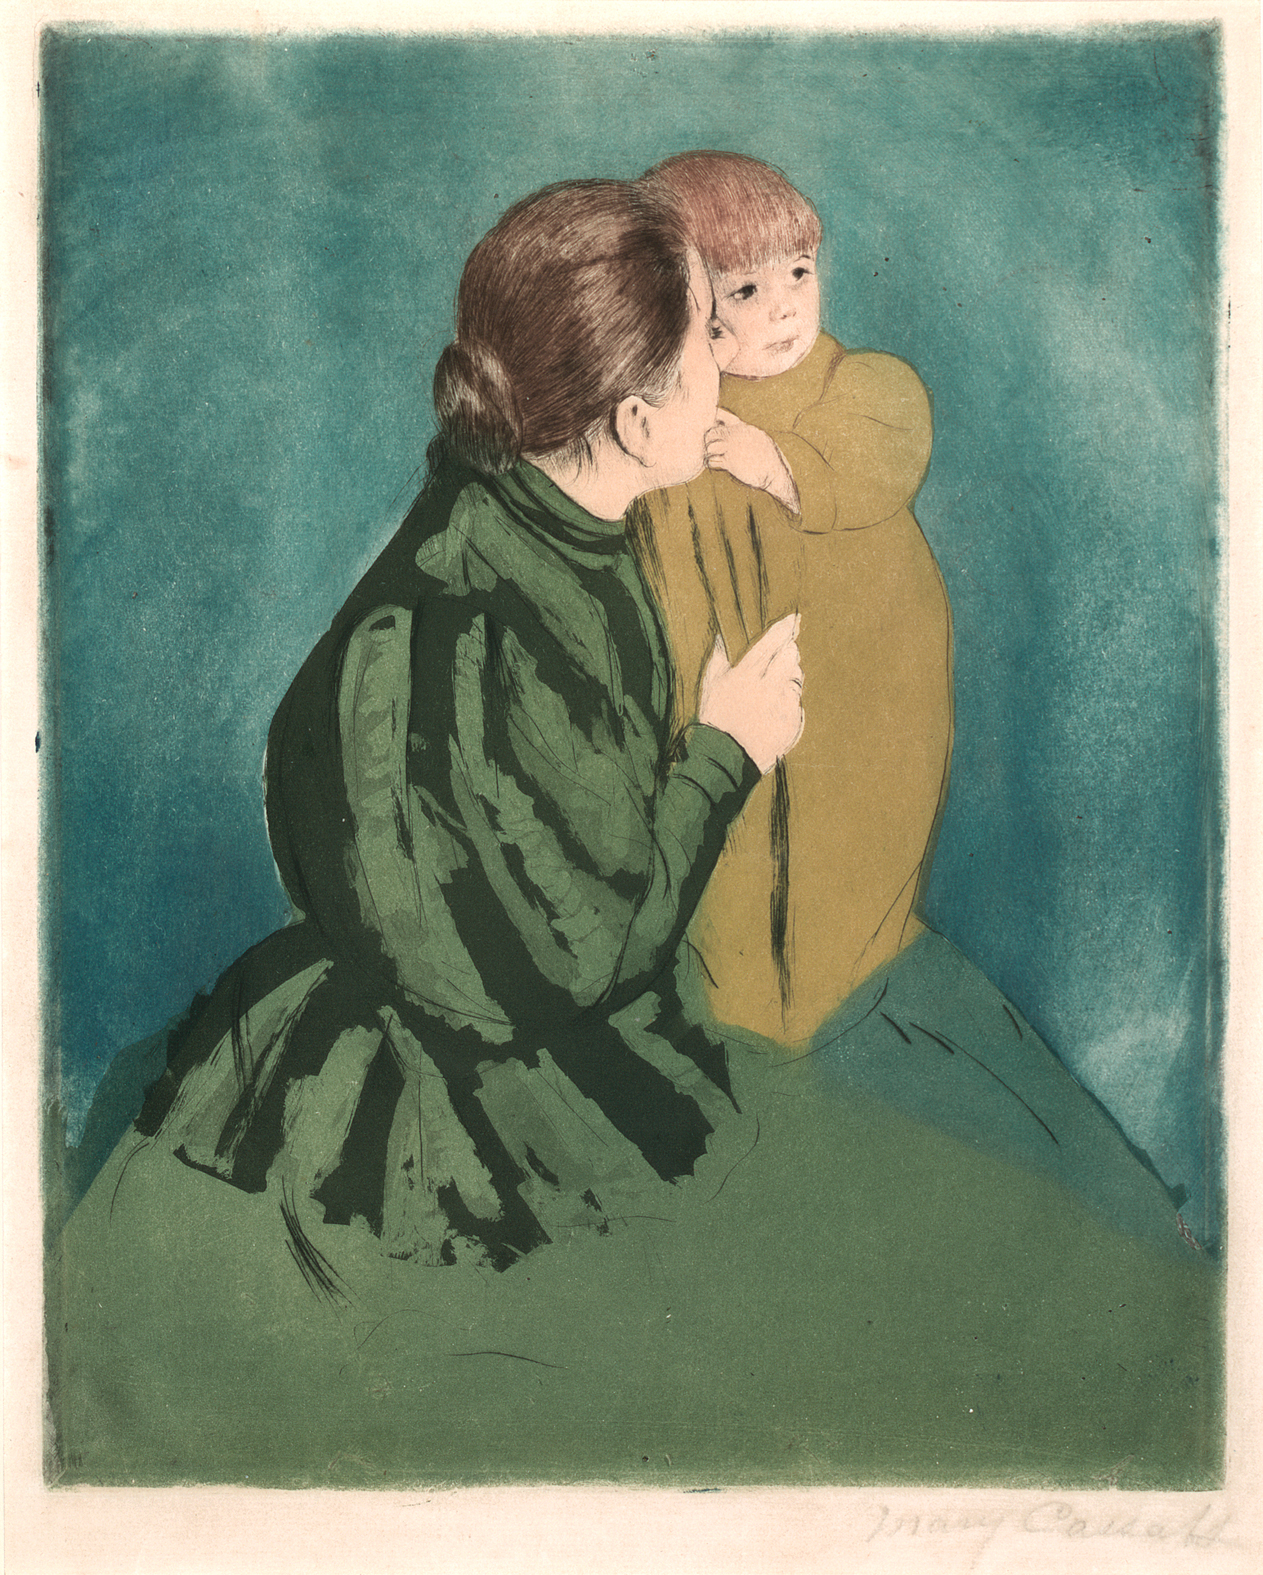 Peasant Mother and Child, a drypoint aquatint print by Mary Cassatt